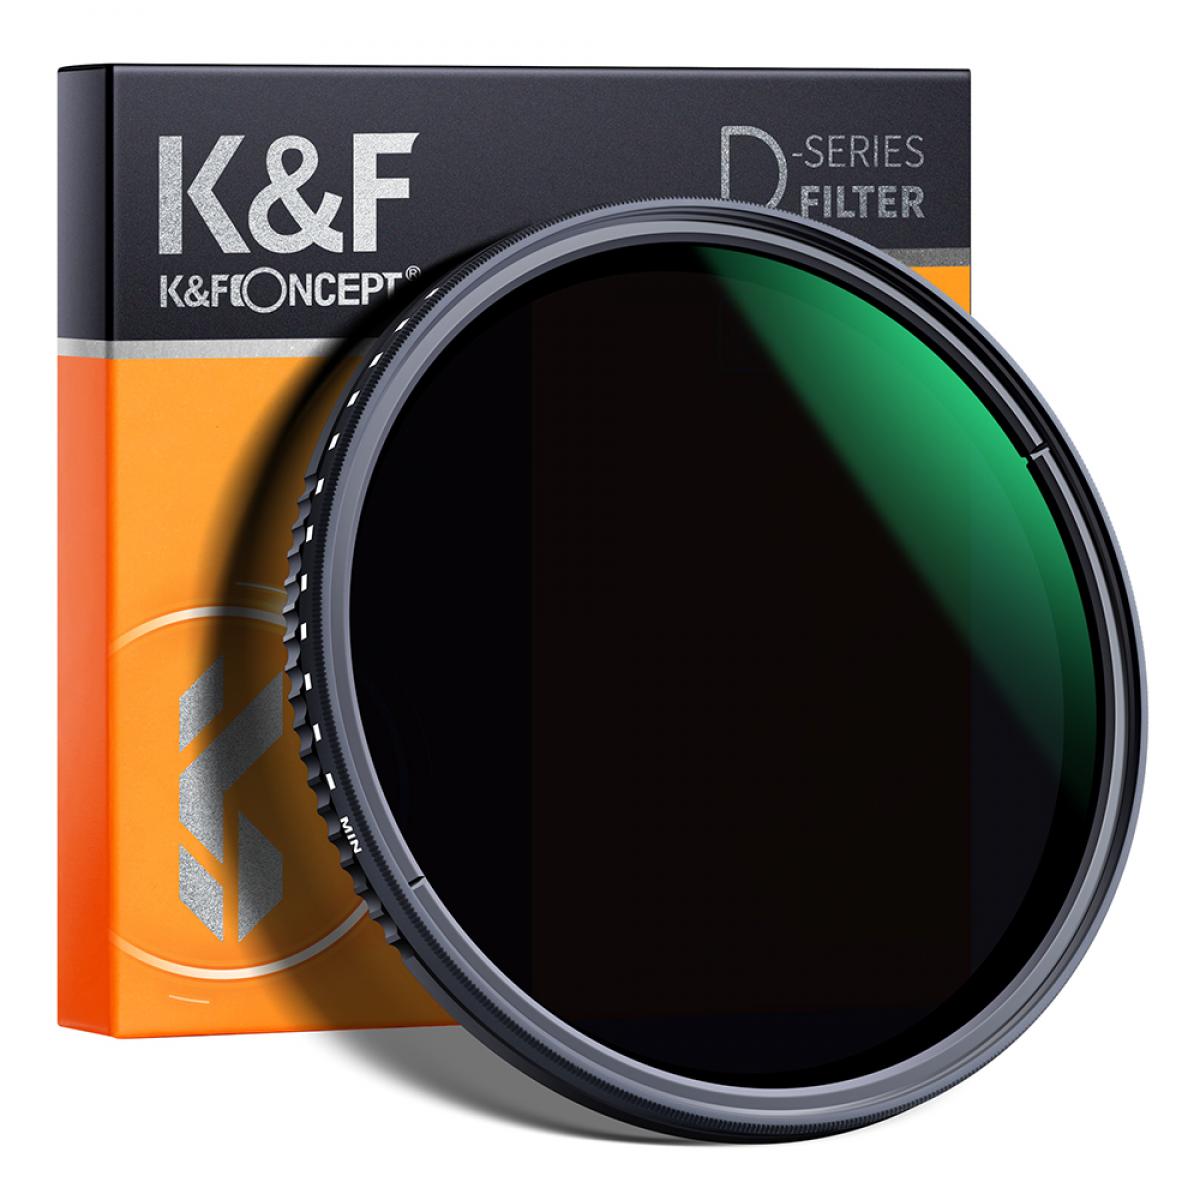 K&F Concept ND8-ND2000 72mm Nano X Variable ND filter with Multi - Resistant coating